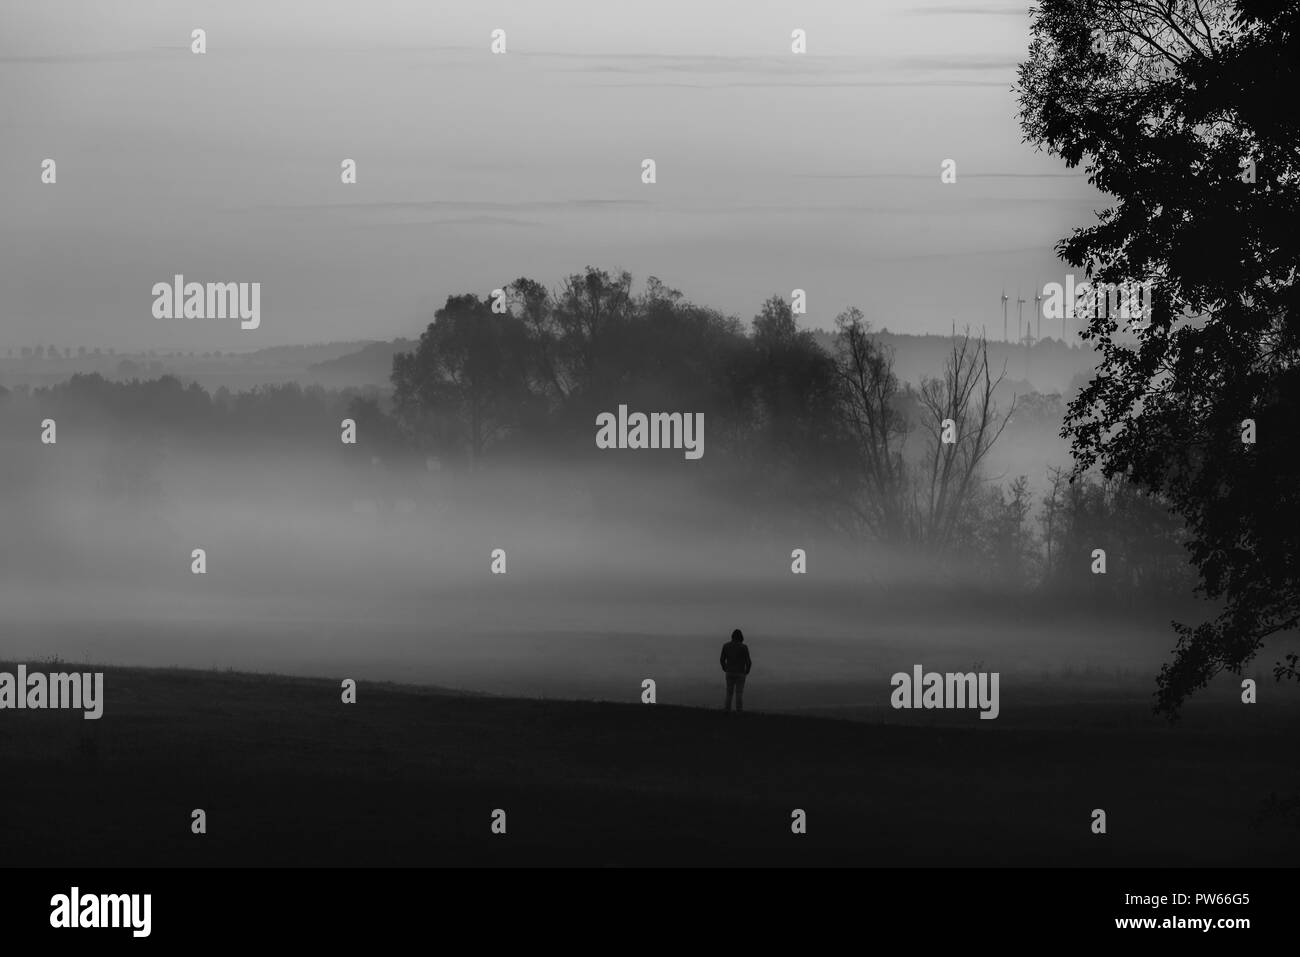 Solitude theme image with the silhouette of a man, standing, alone, in dense mist, in nature, in Germany. Black and white image. Stock Photo